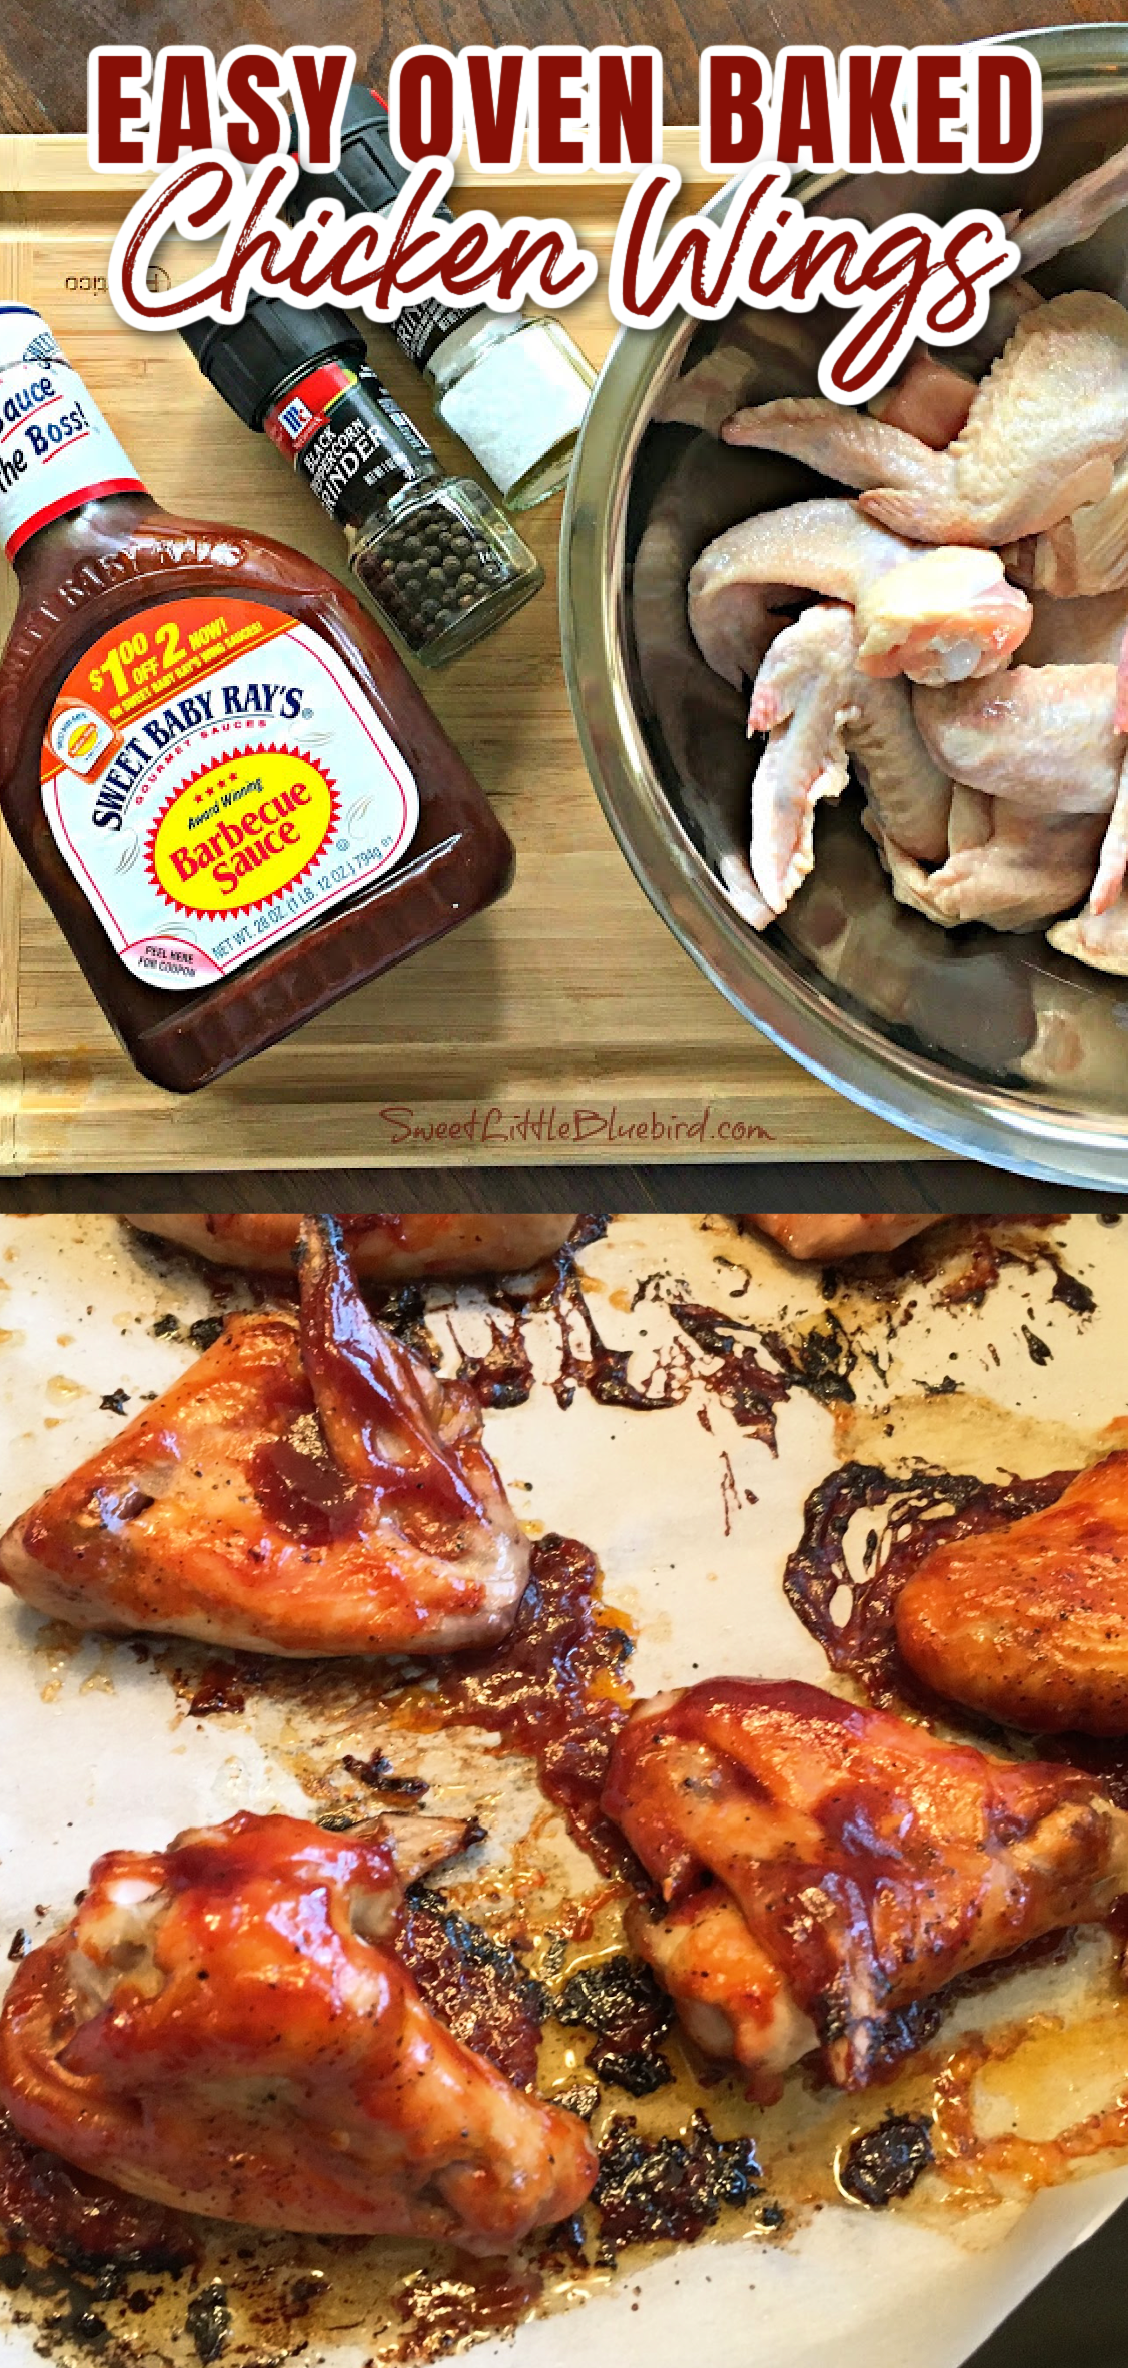 This is a 2 image collage. The top photo shows chicken wings in a bowl on a cutting board next to a bottle of barbecue sauce and salt and pepper. 